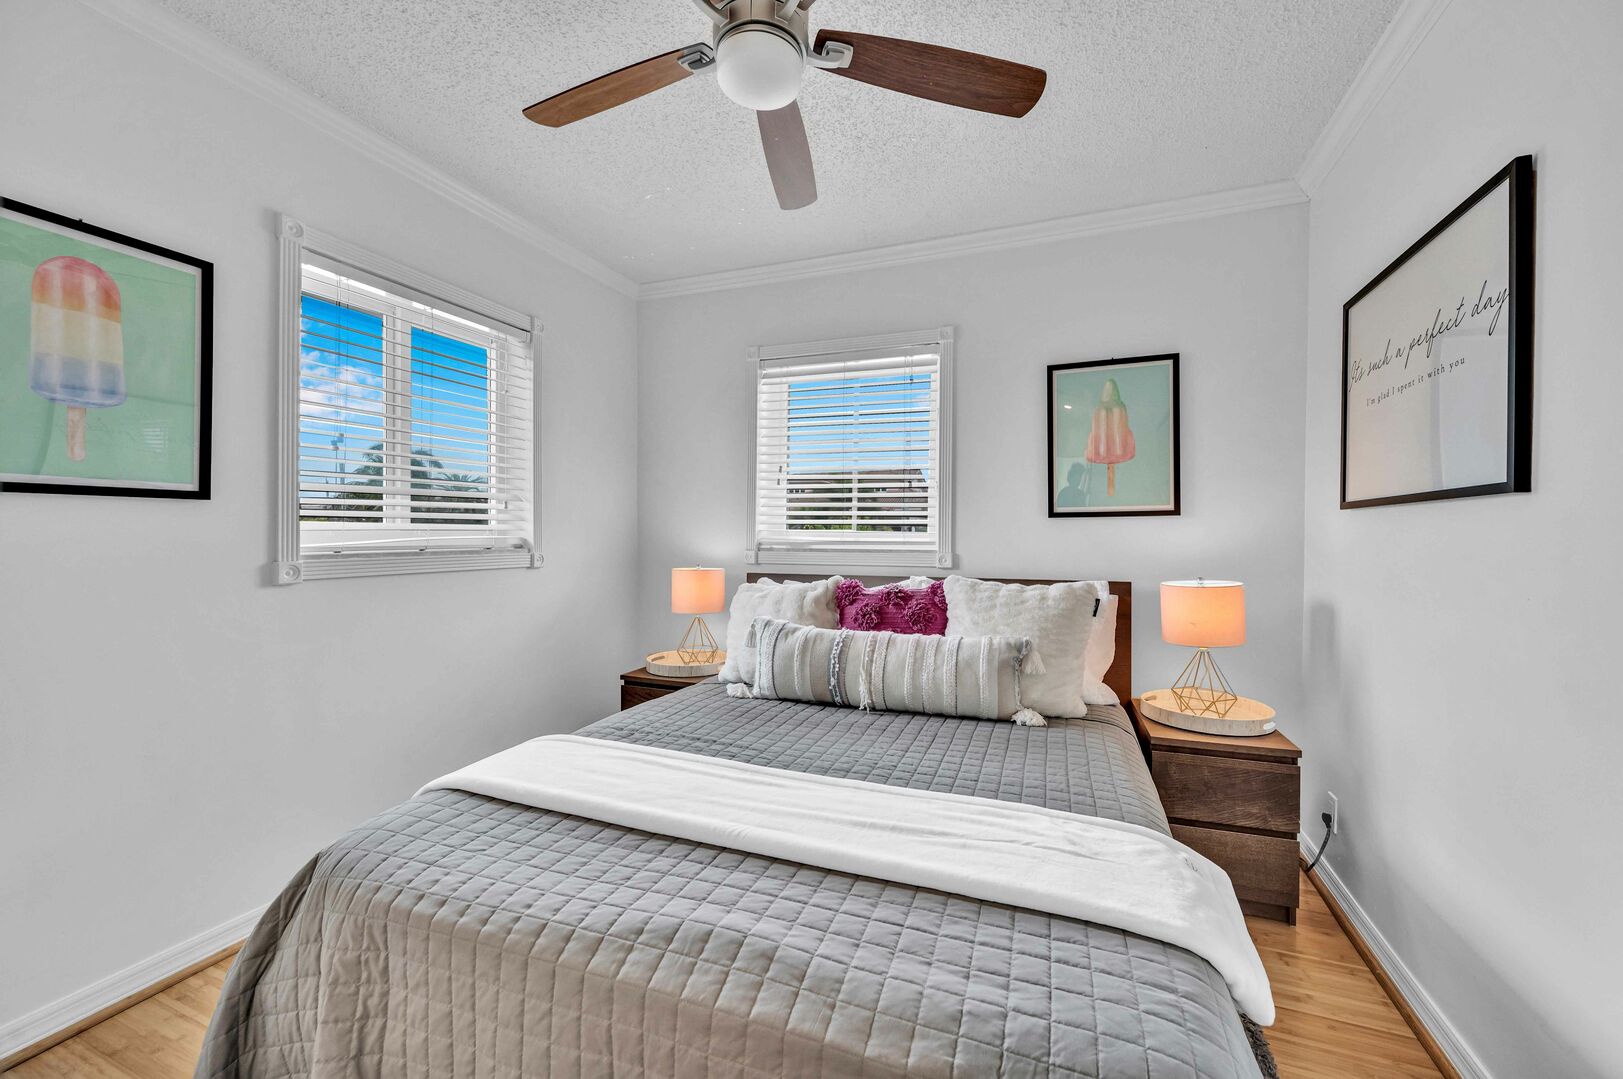 All of the bedrooms have top of the line linens, furnishings and a flat screen SMART TV.